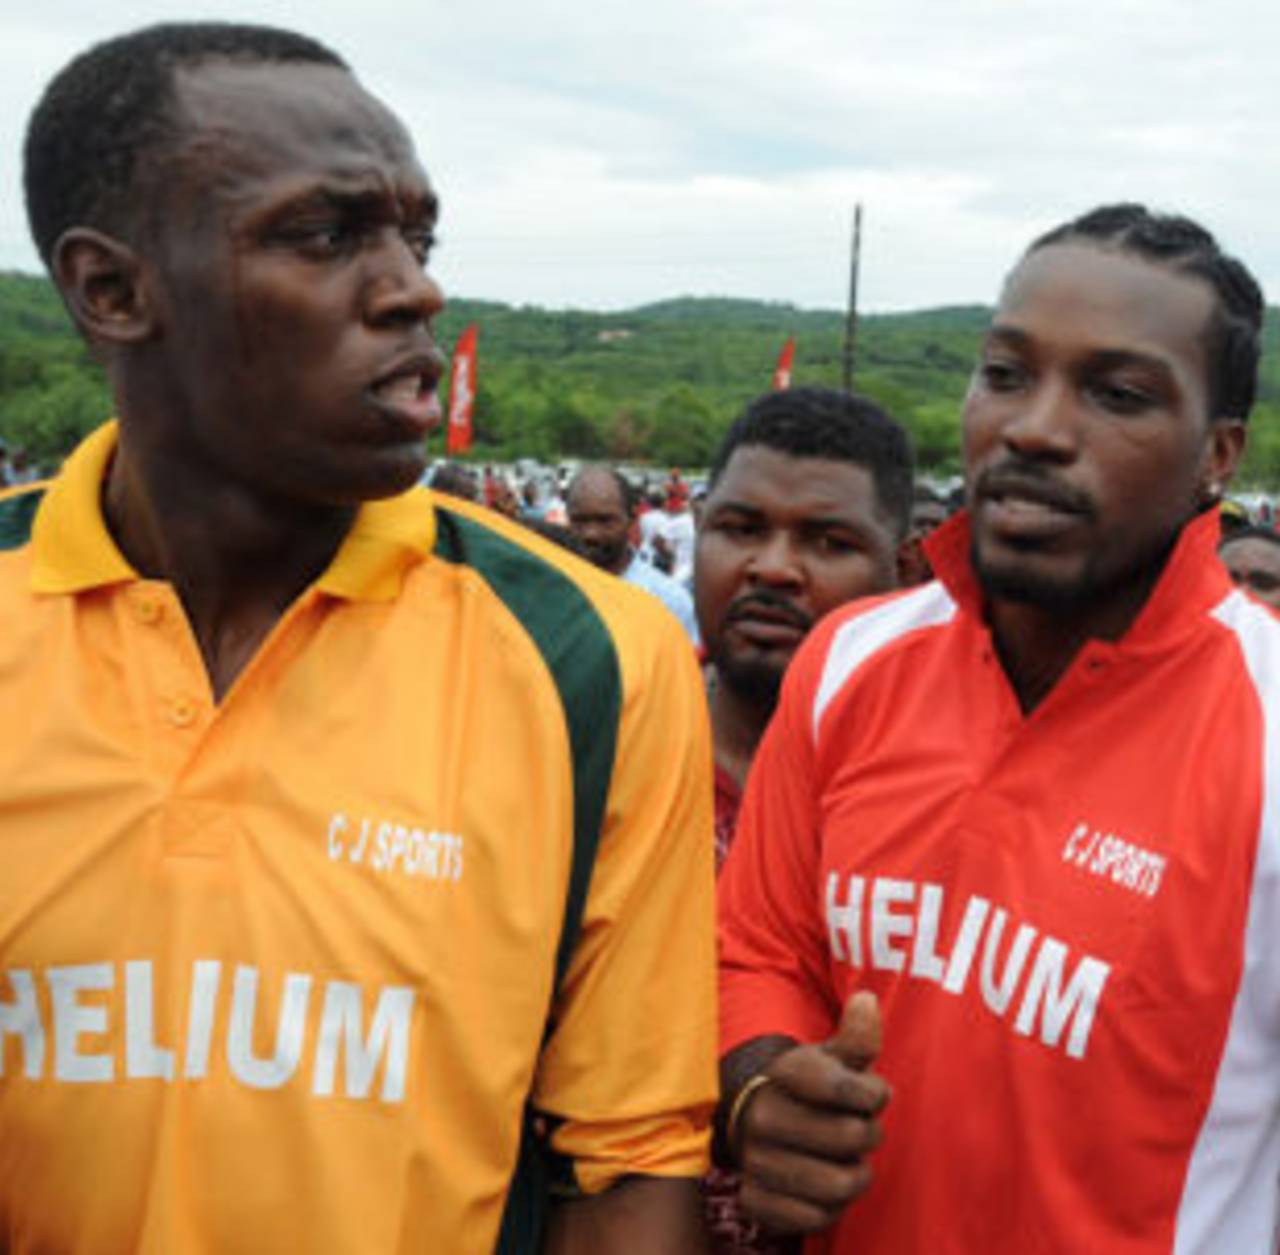 Usain  Bolt and Chris Gayle at a friendly cricket match in Jamaica, October 18, 2009